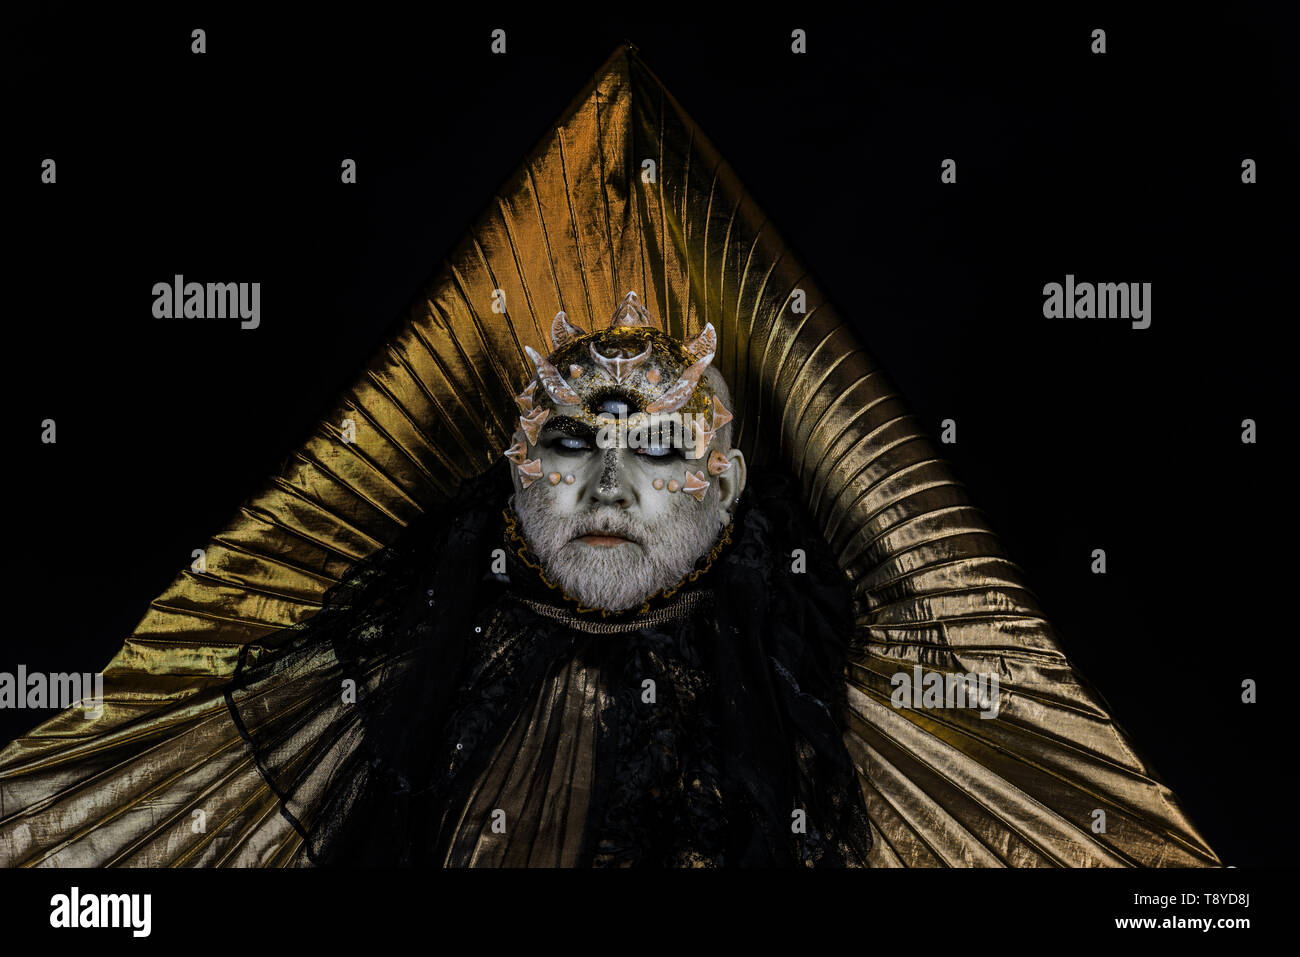 Creepy sea monster with thorns, dragon skin resting in his realm, almighty  deity. Bearded man with alien or reptilian make-up in dark outfit with  Stock Photo - Alamy